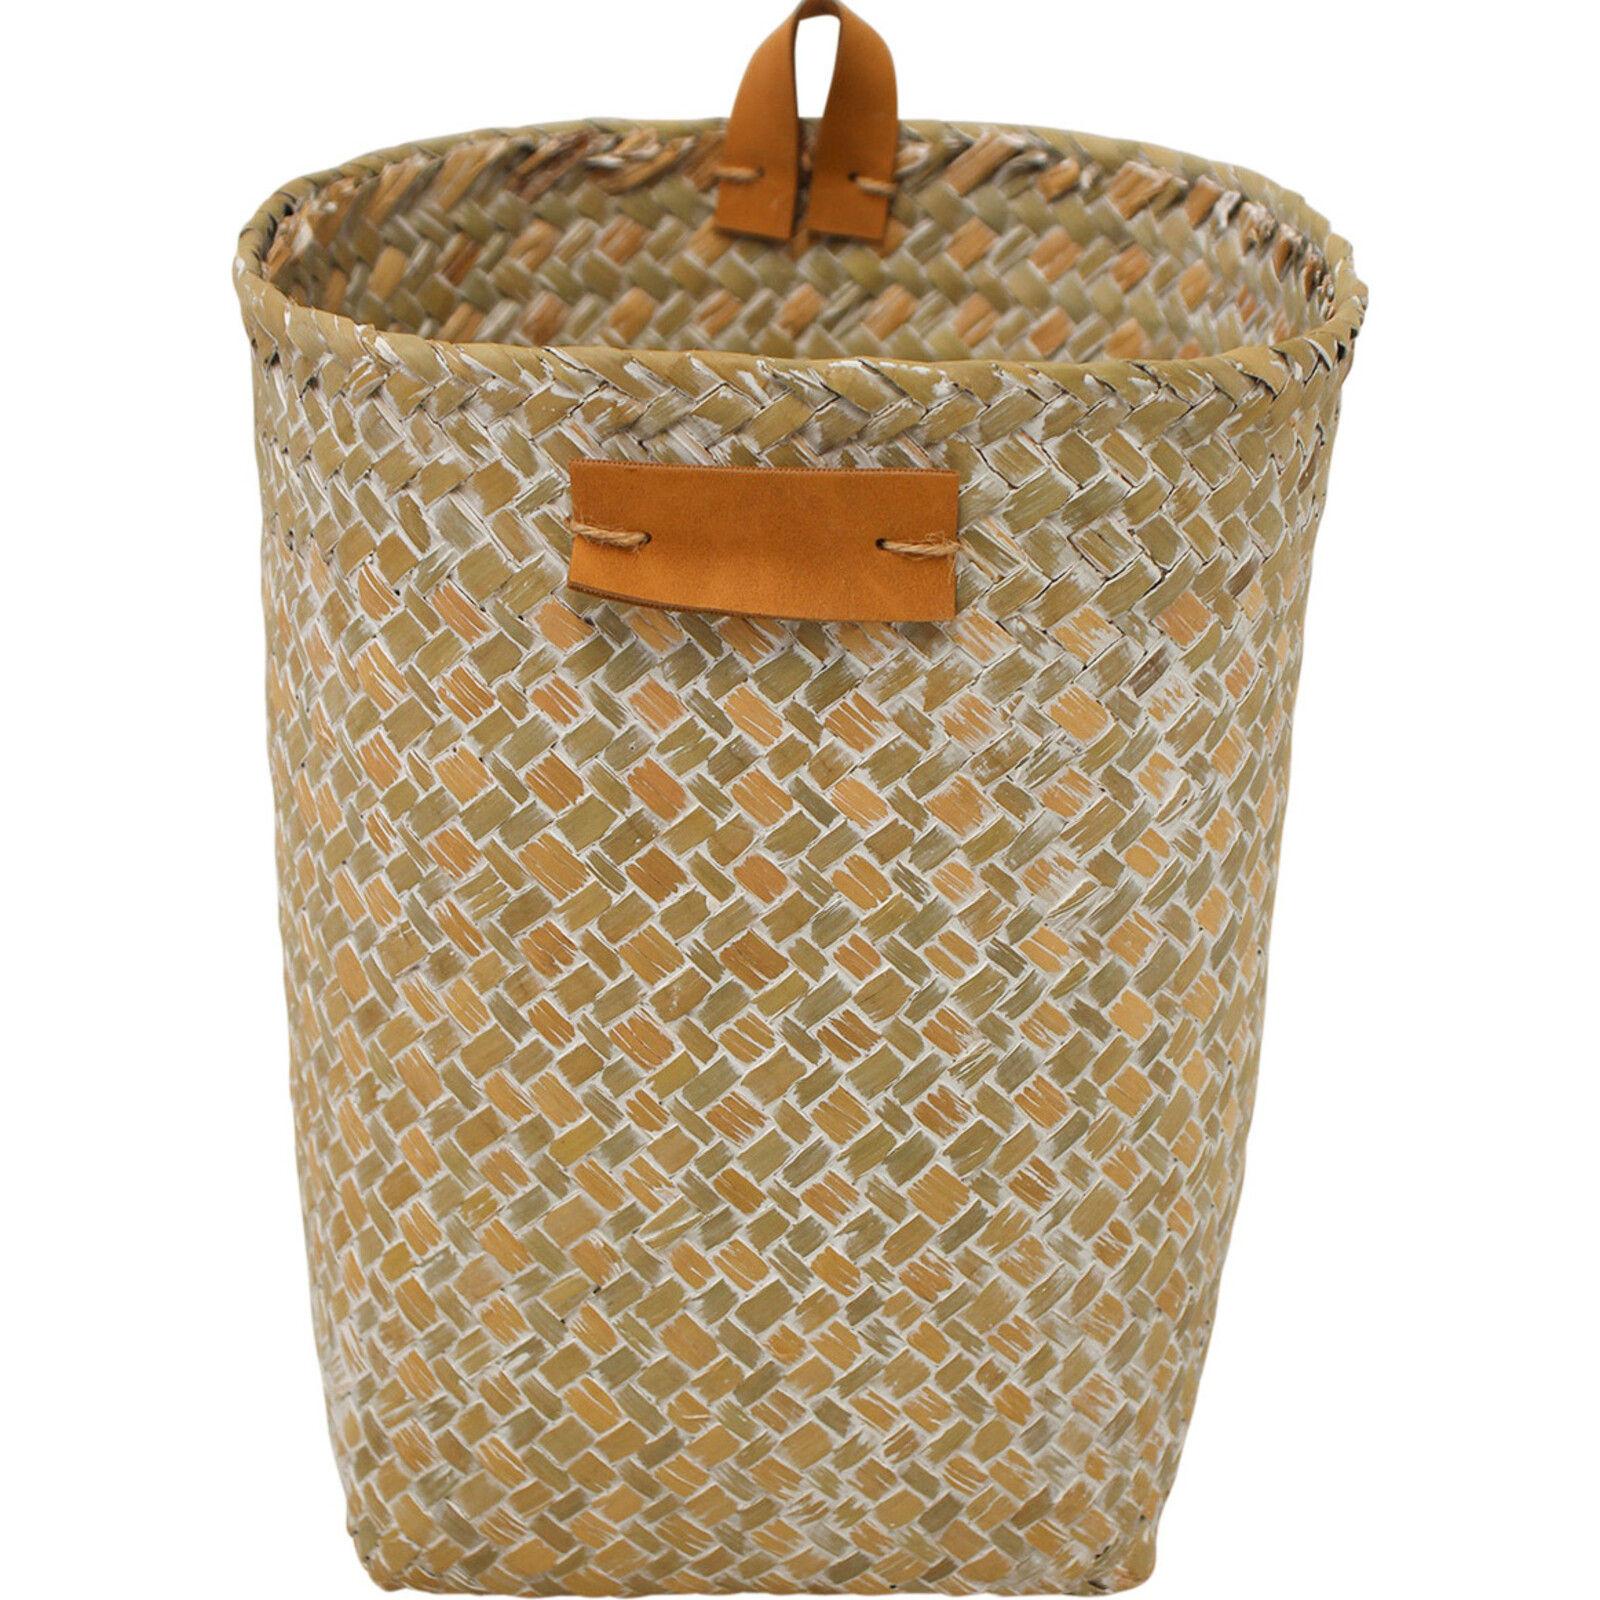 Woven Tidy/Planter Wash Med